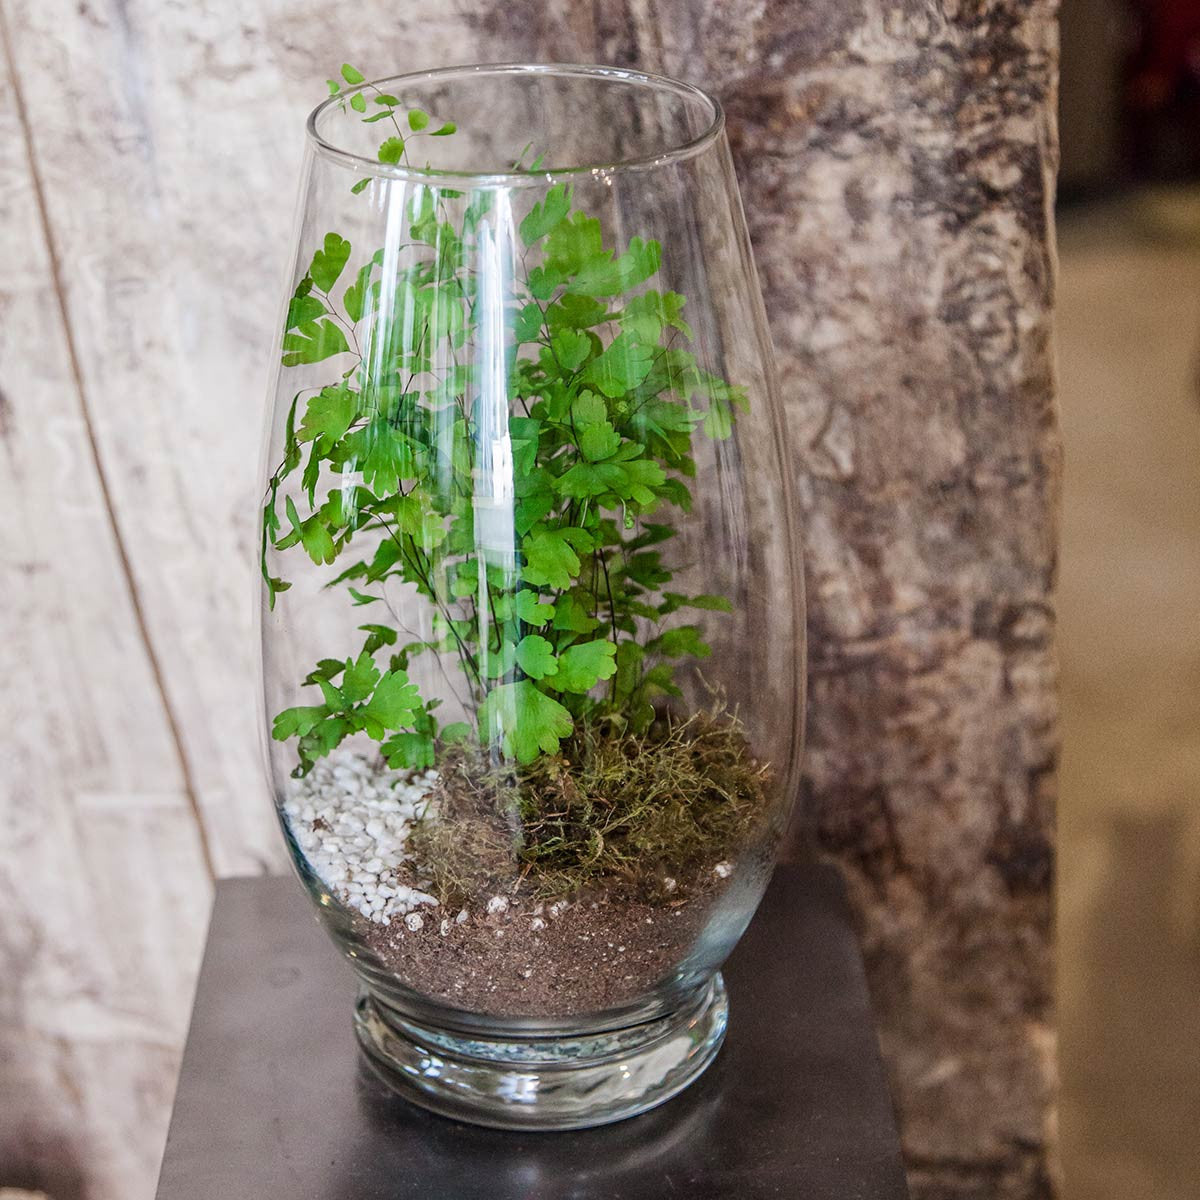 celebrity vase in use as a terrarium with plant moss and stones